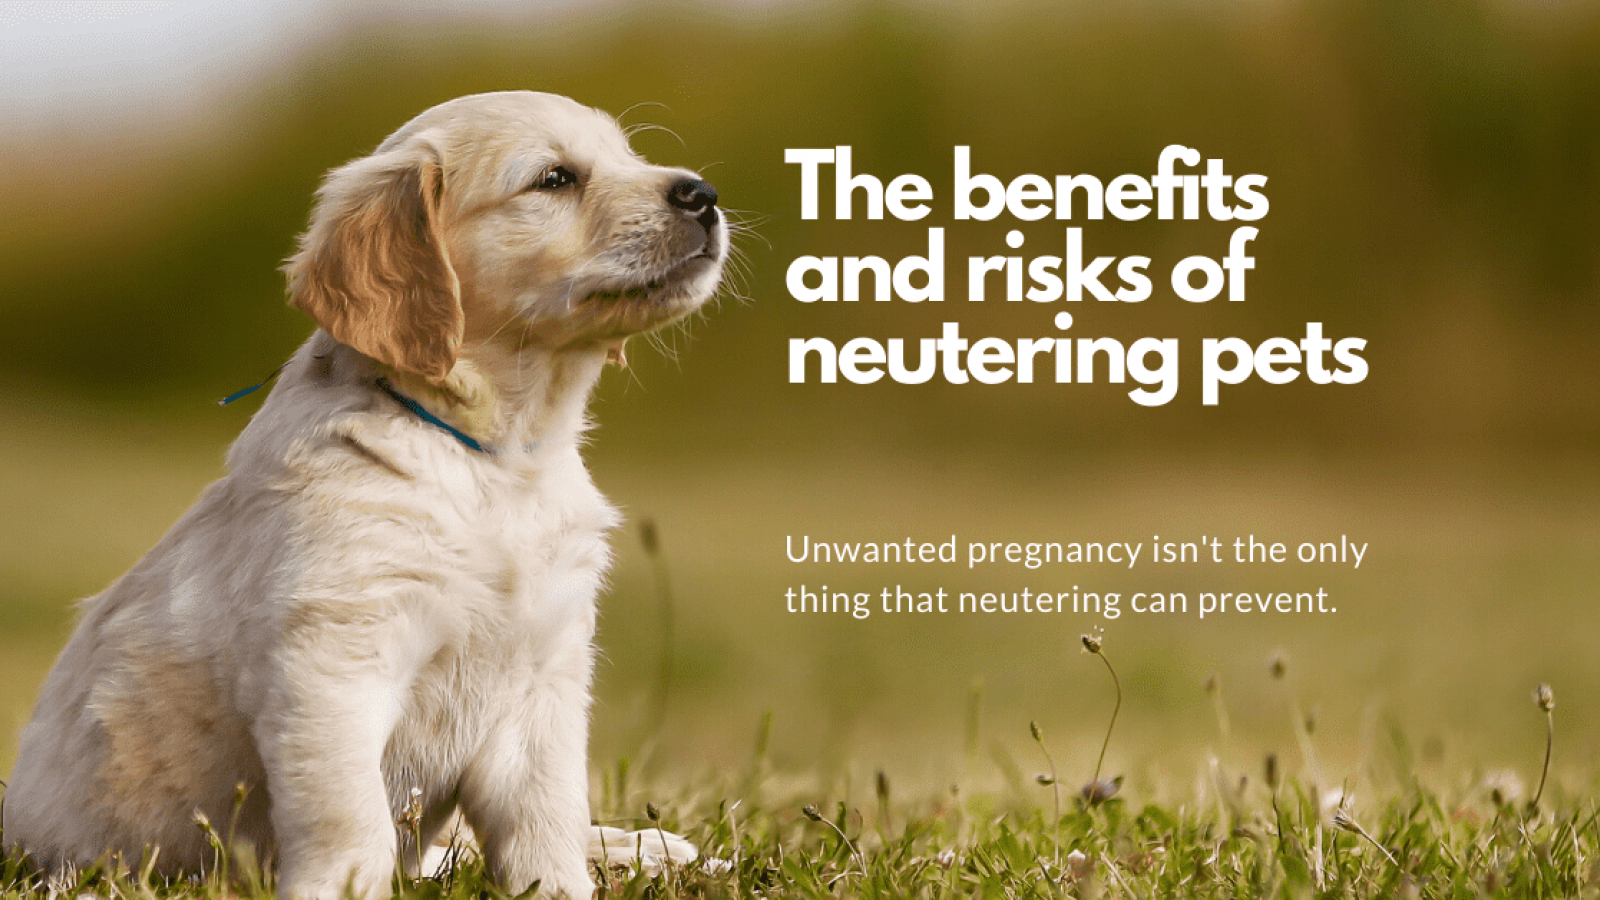 The benefits and risks of neutering pets